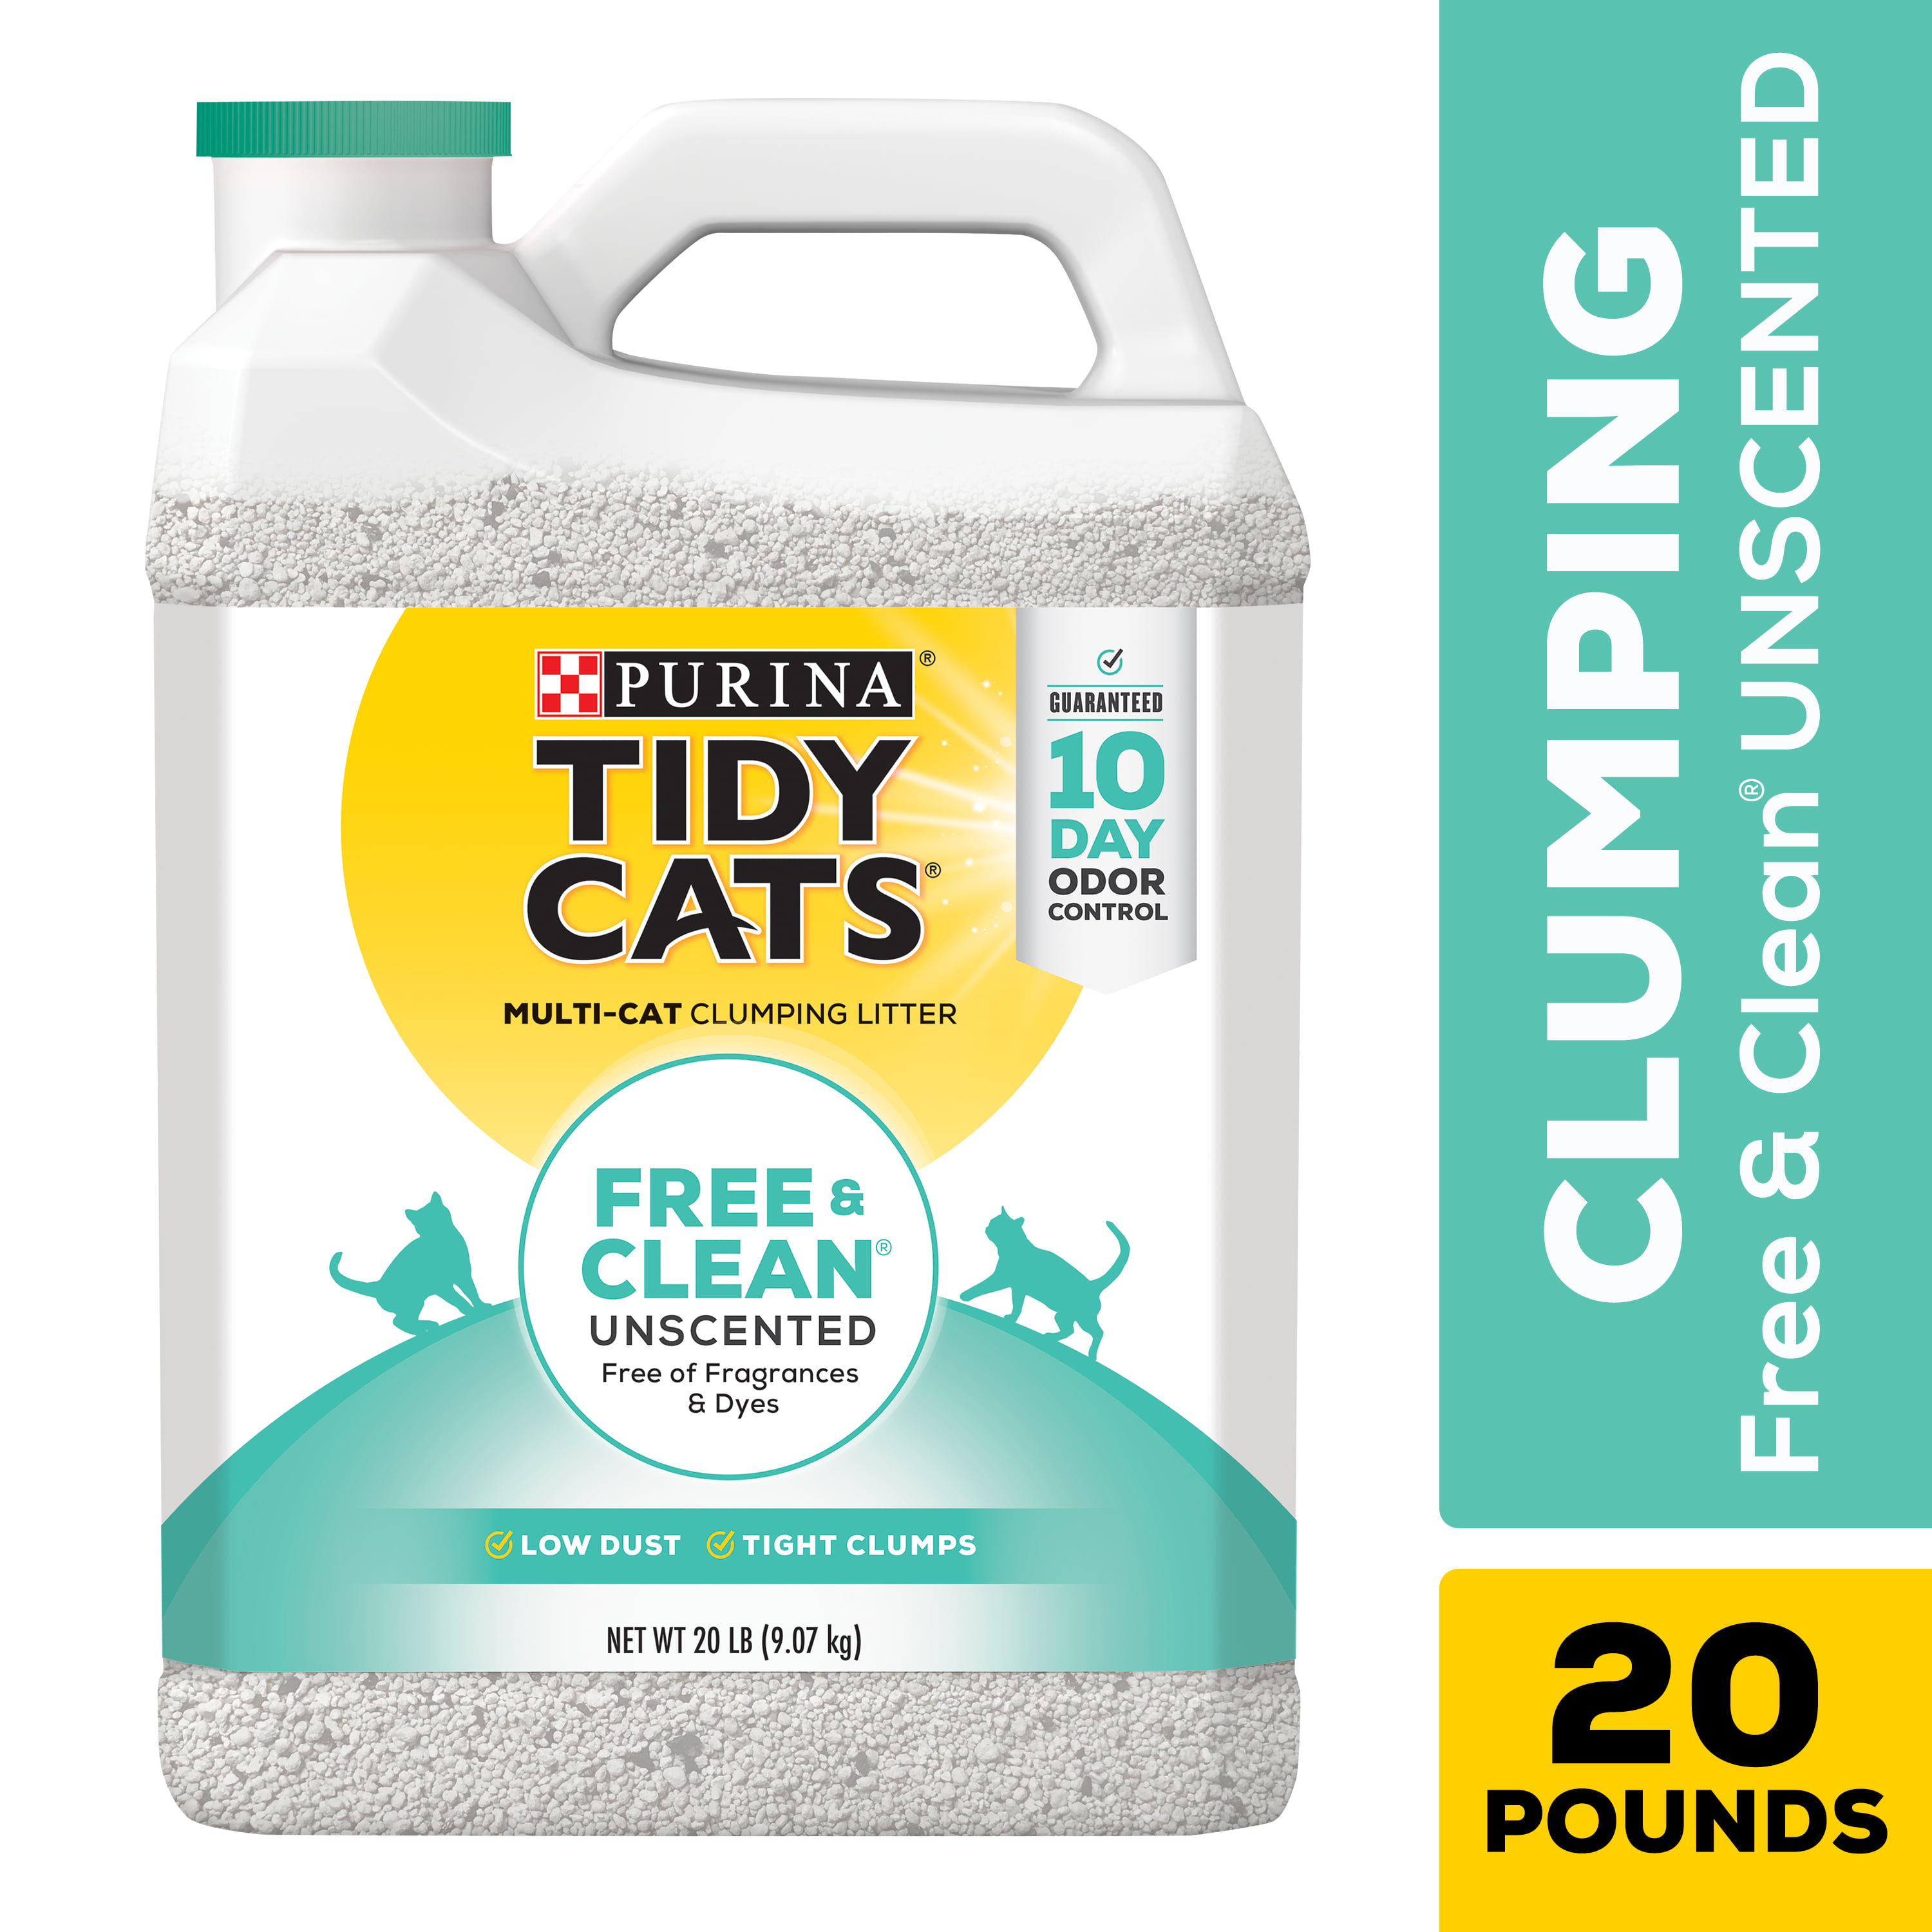 tidy cats free and clean